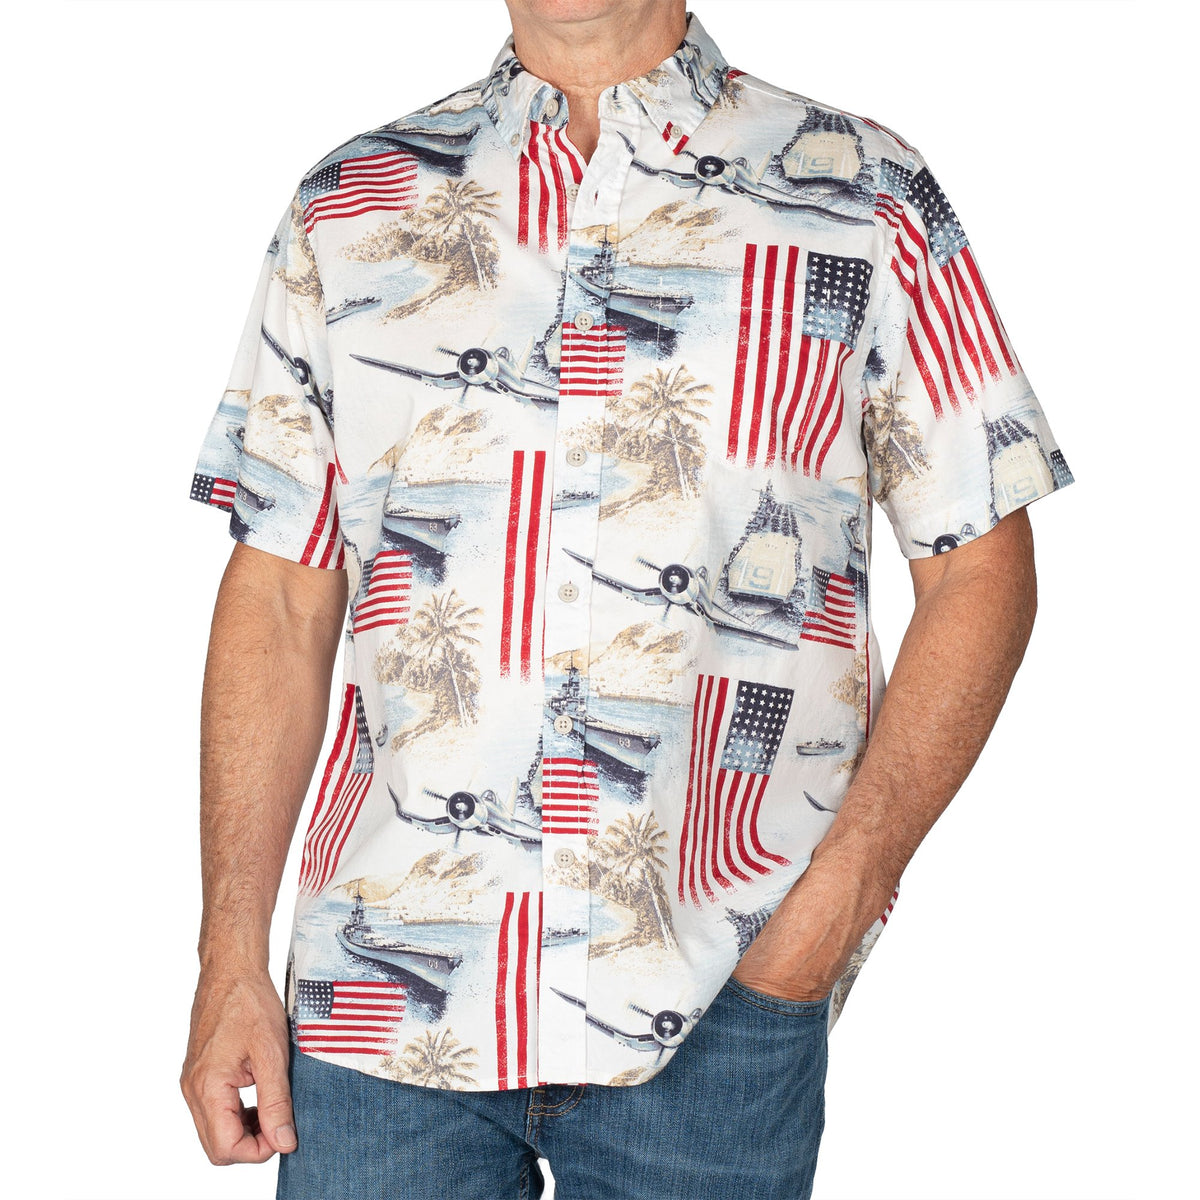 Men's Independence Day Button Down 100% Cotton Shirt – 4th of July Shirts